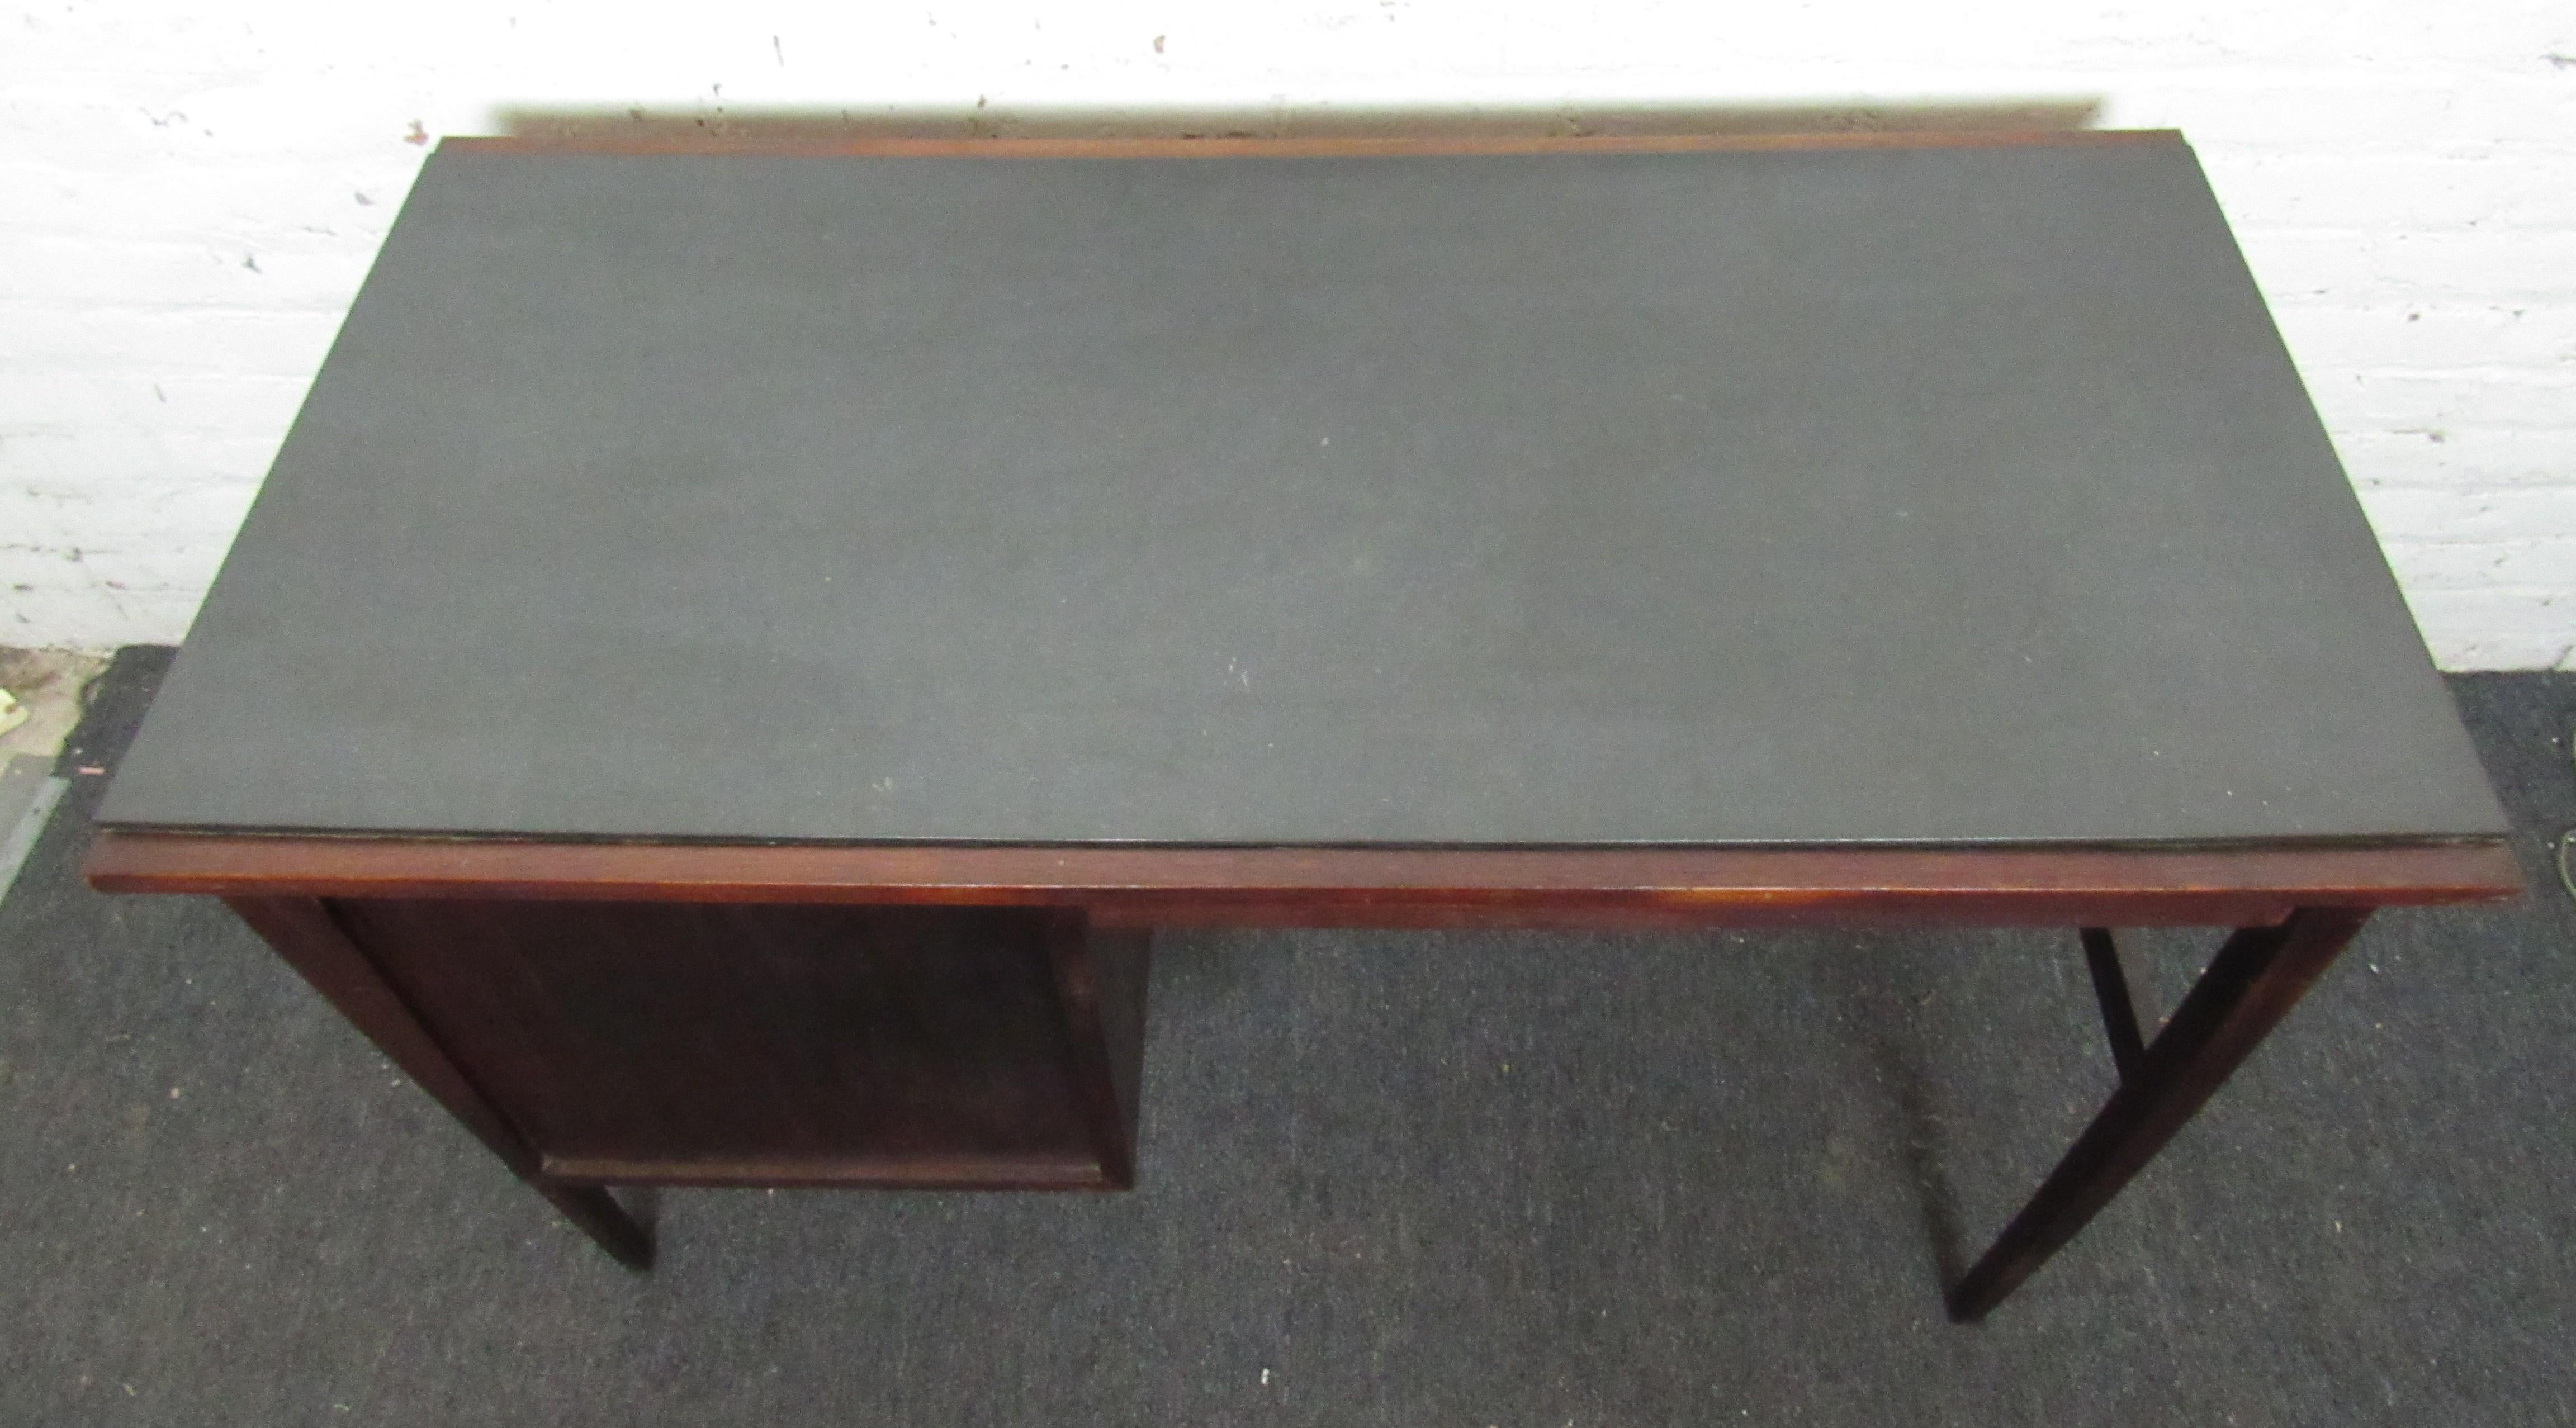 Beautiful vintage modern Danish Writing desk with a unique slate top. The desk features one smaller drawer and one file sized drawer. The drawers have beautiful sculpted wood handles.

(Please confirm item location - NY or NJ - with dealer).